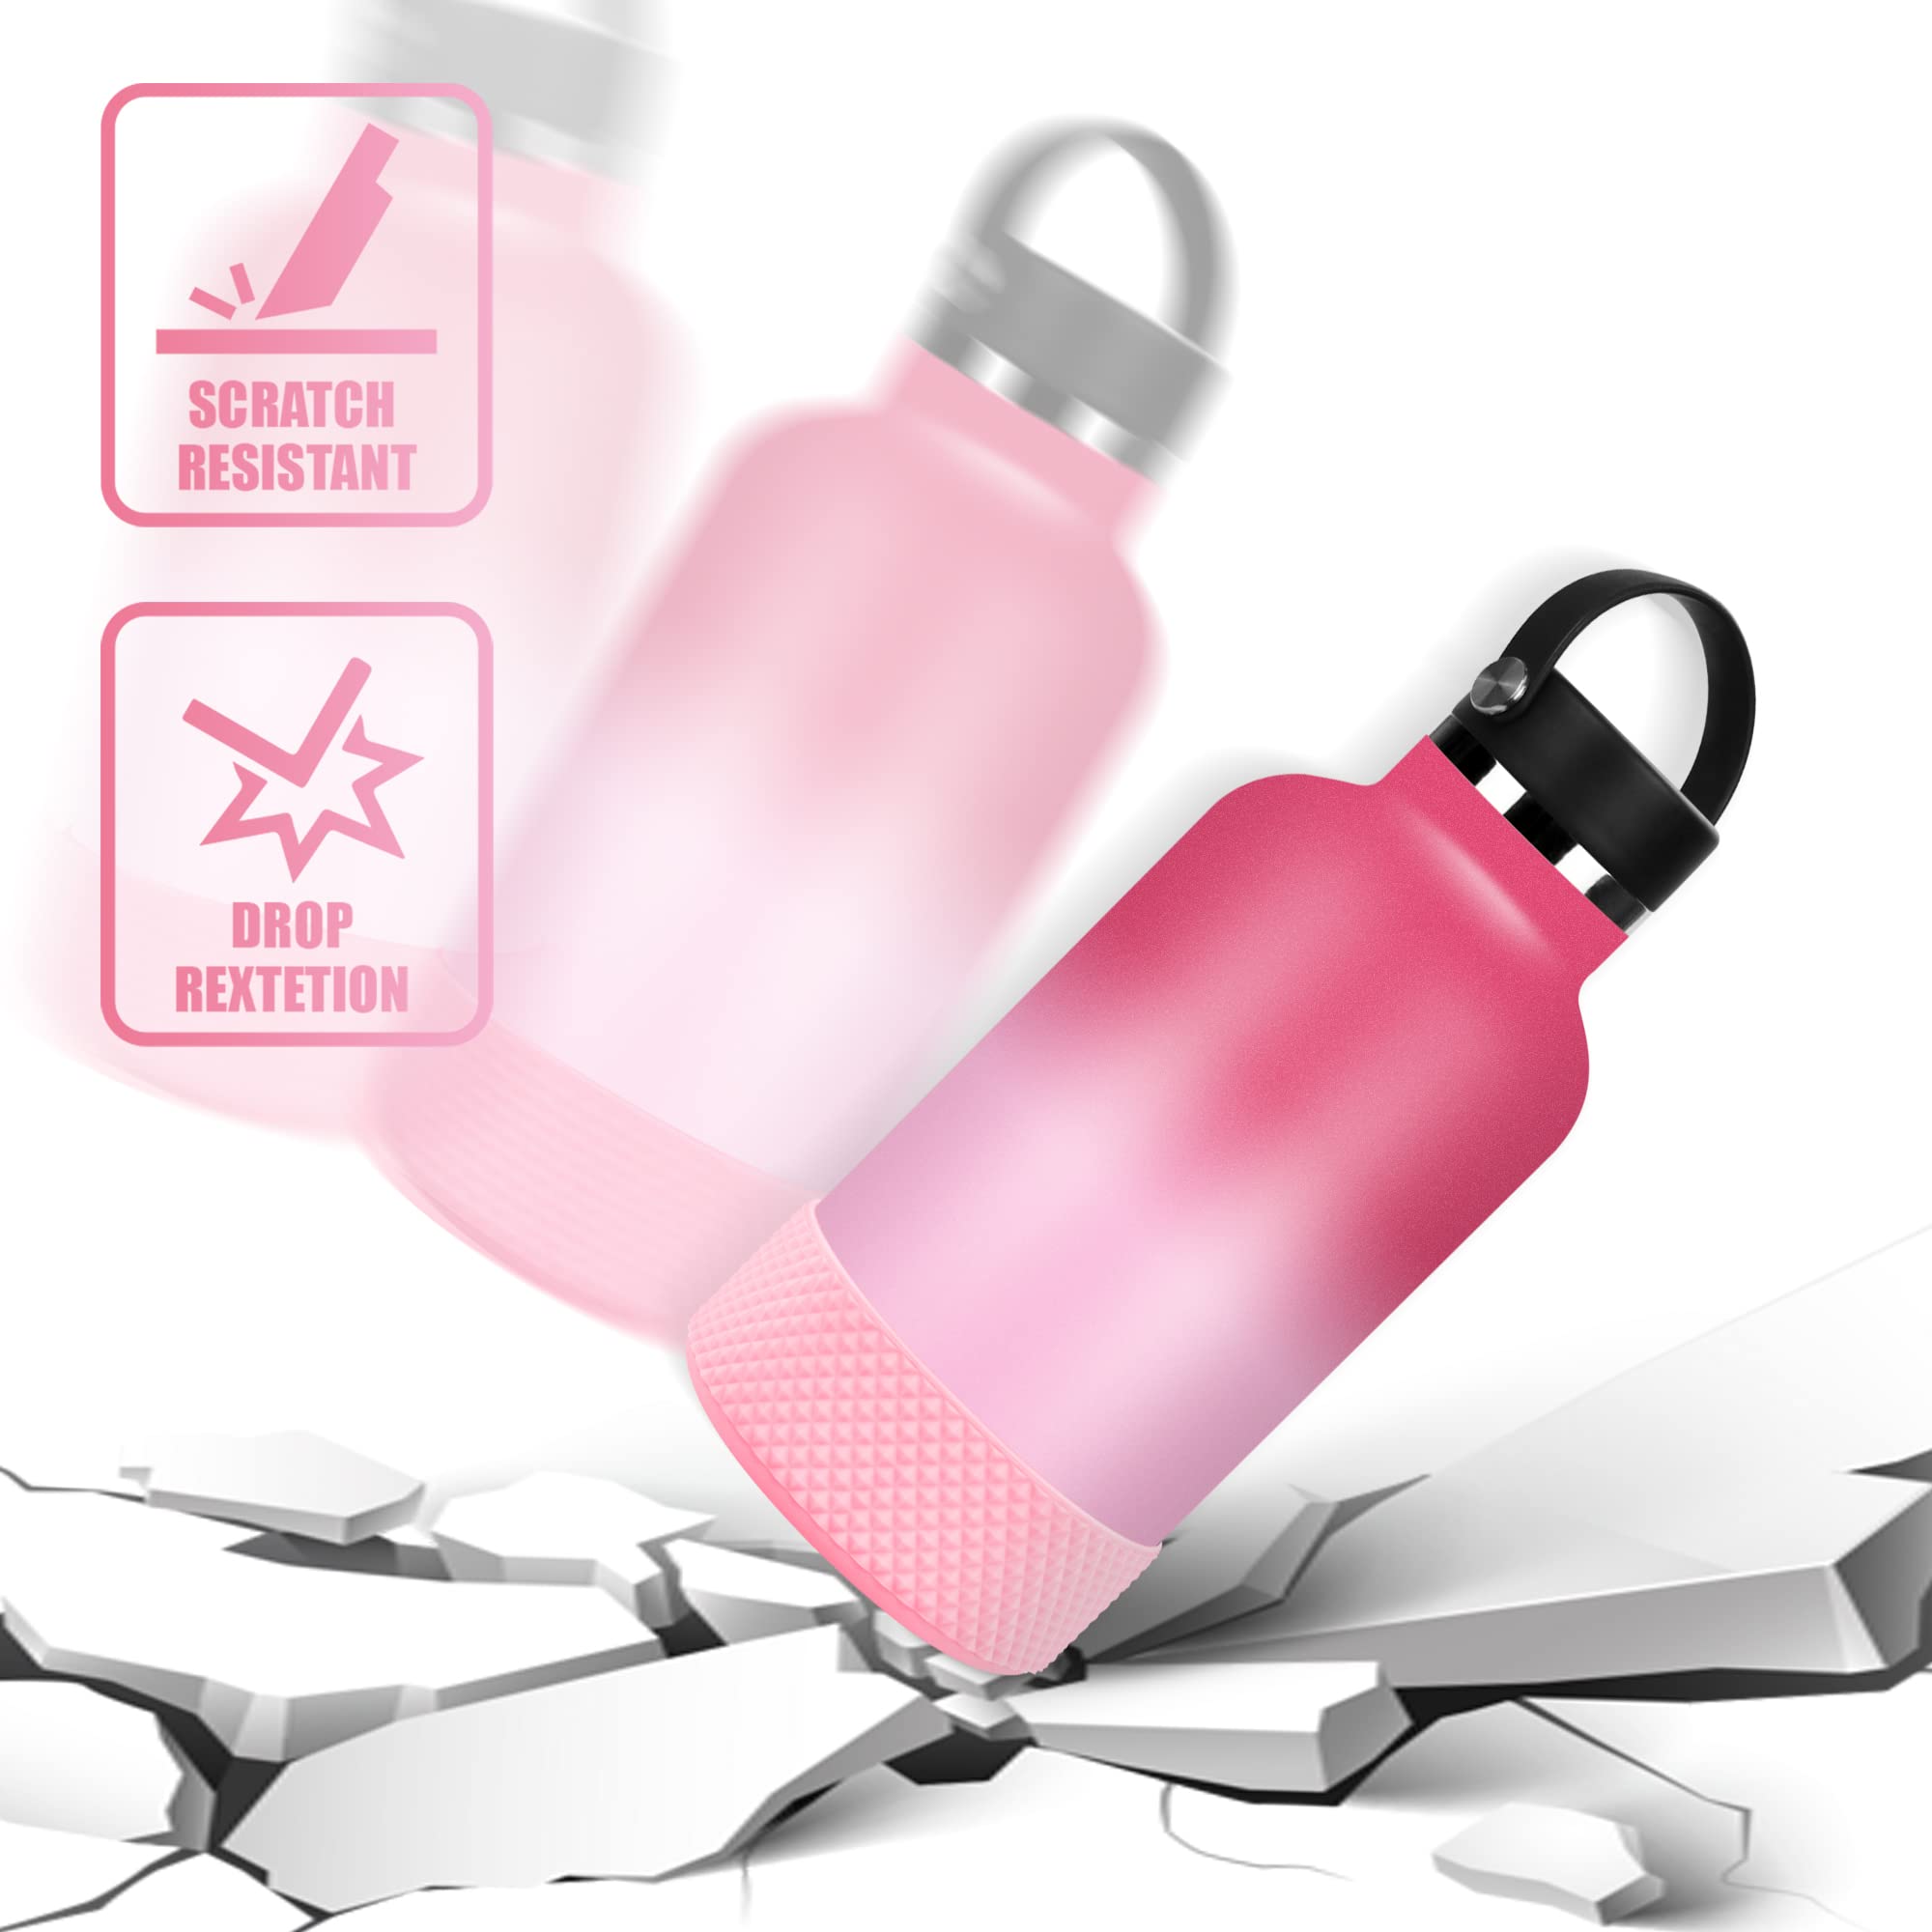 GLINK Bottle Boot, Compatible with Hydro Flask 2.0 Wide Mouth 64 oz Water Bottle and Others, Protective Silicone Bottom Sleeve Cover, Anti-Slip Flex Boot with Diamond Texture (Light Pink)